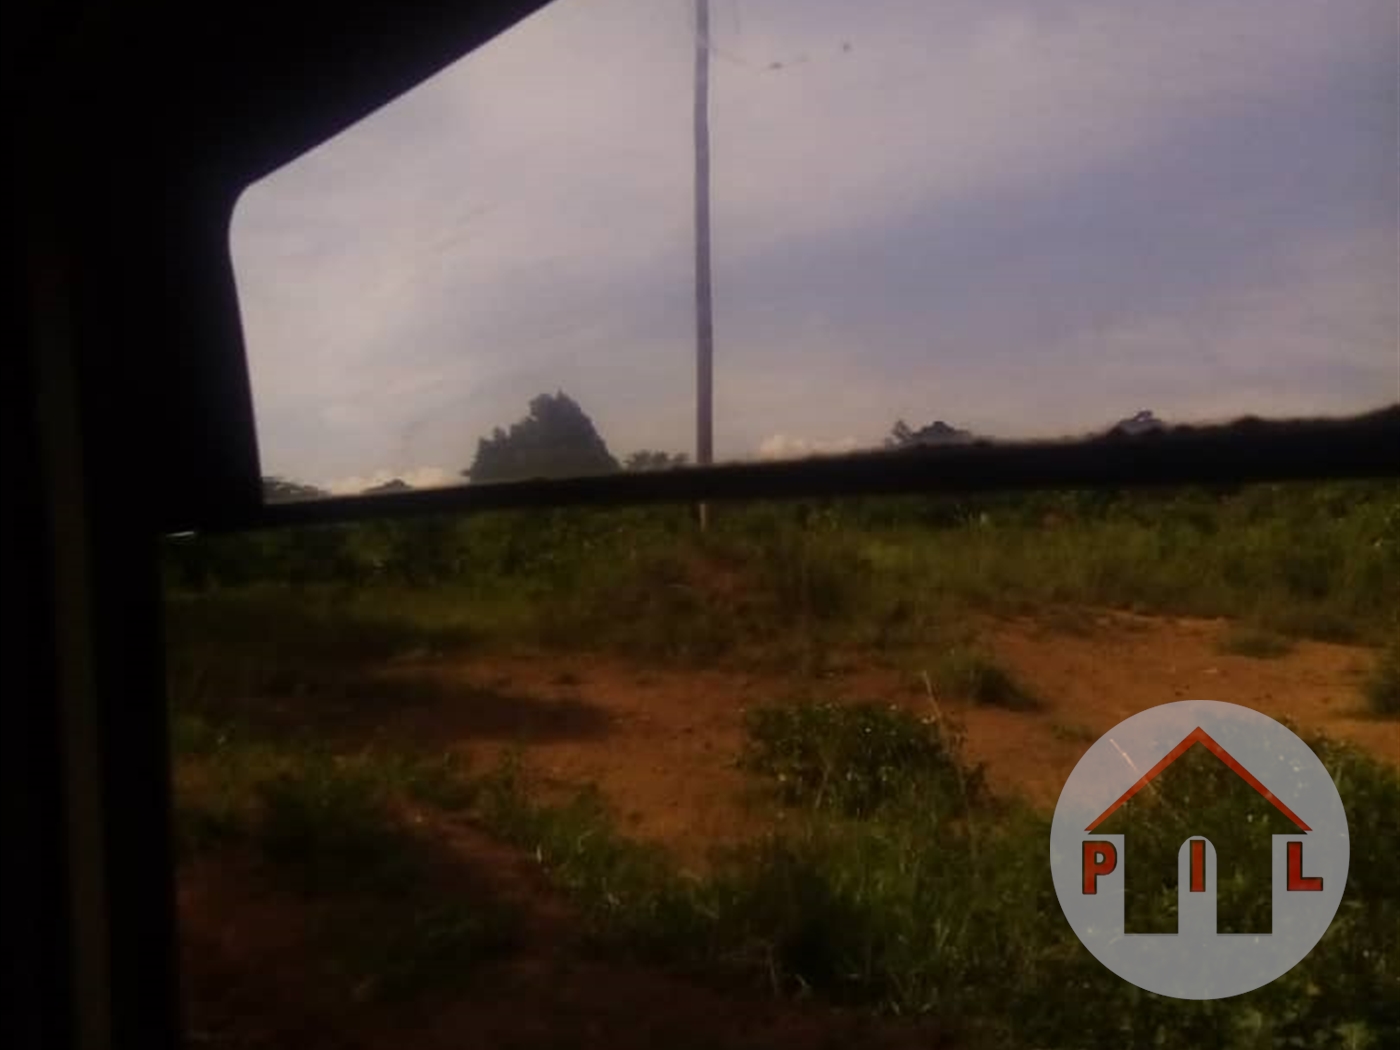 Agricultural Land for sale in Nsuube Mukono